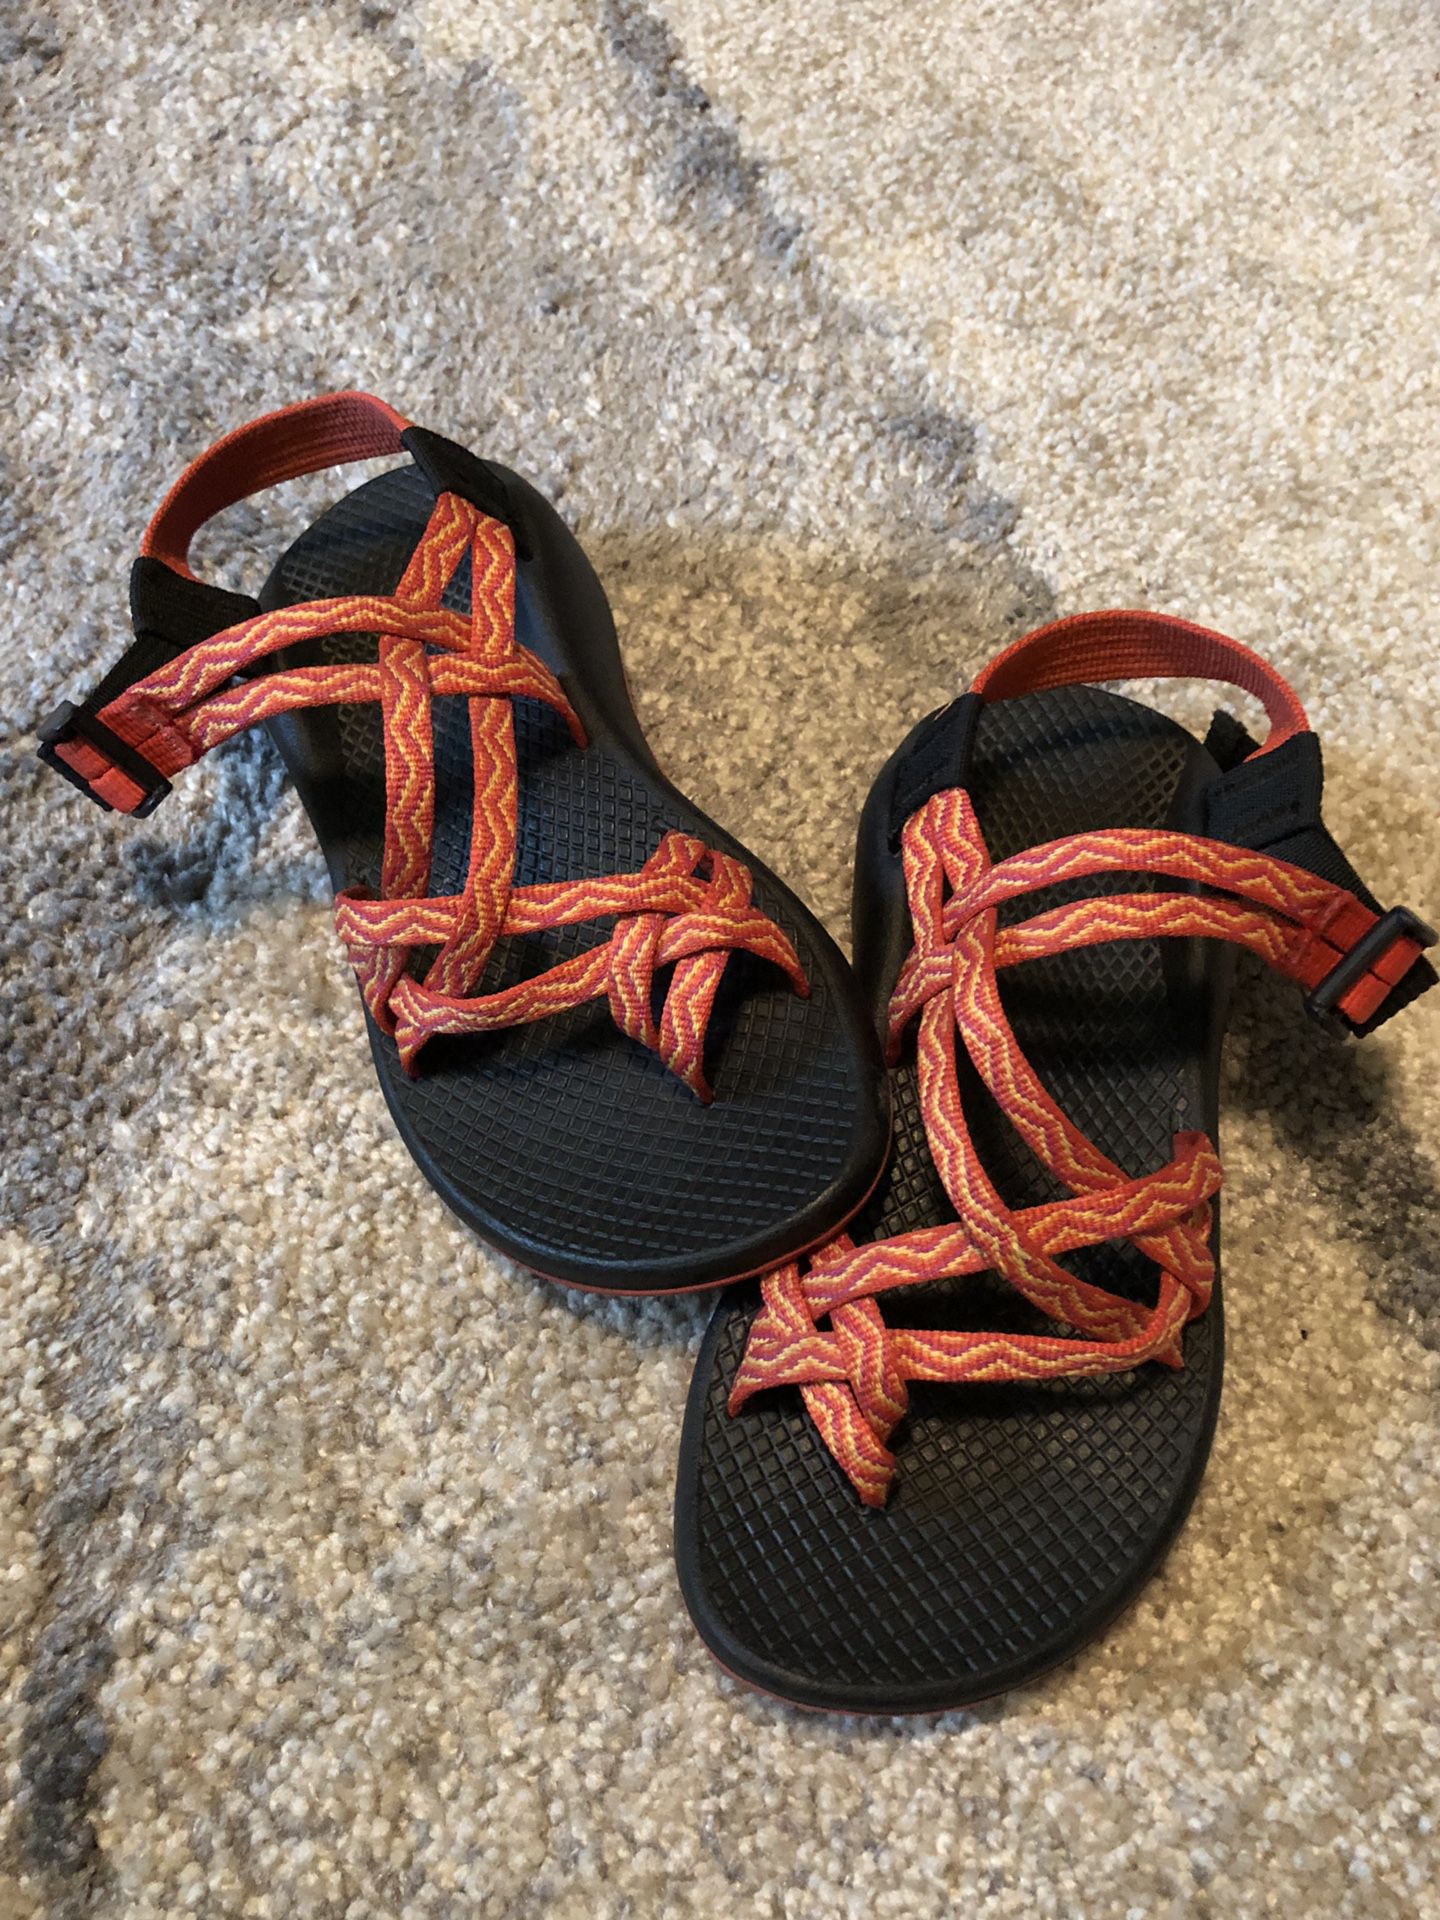 Chacos size 5